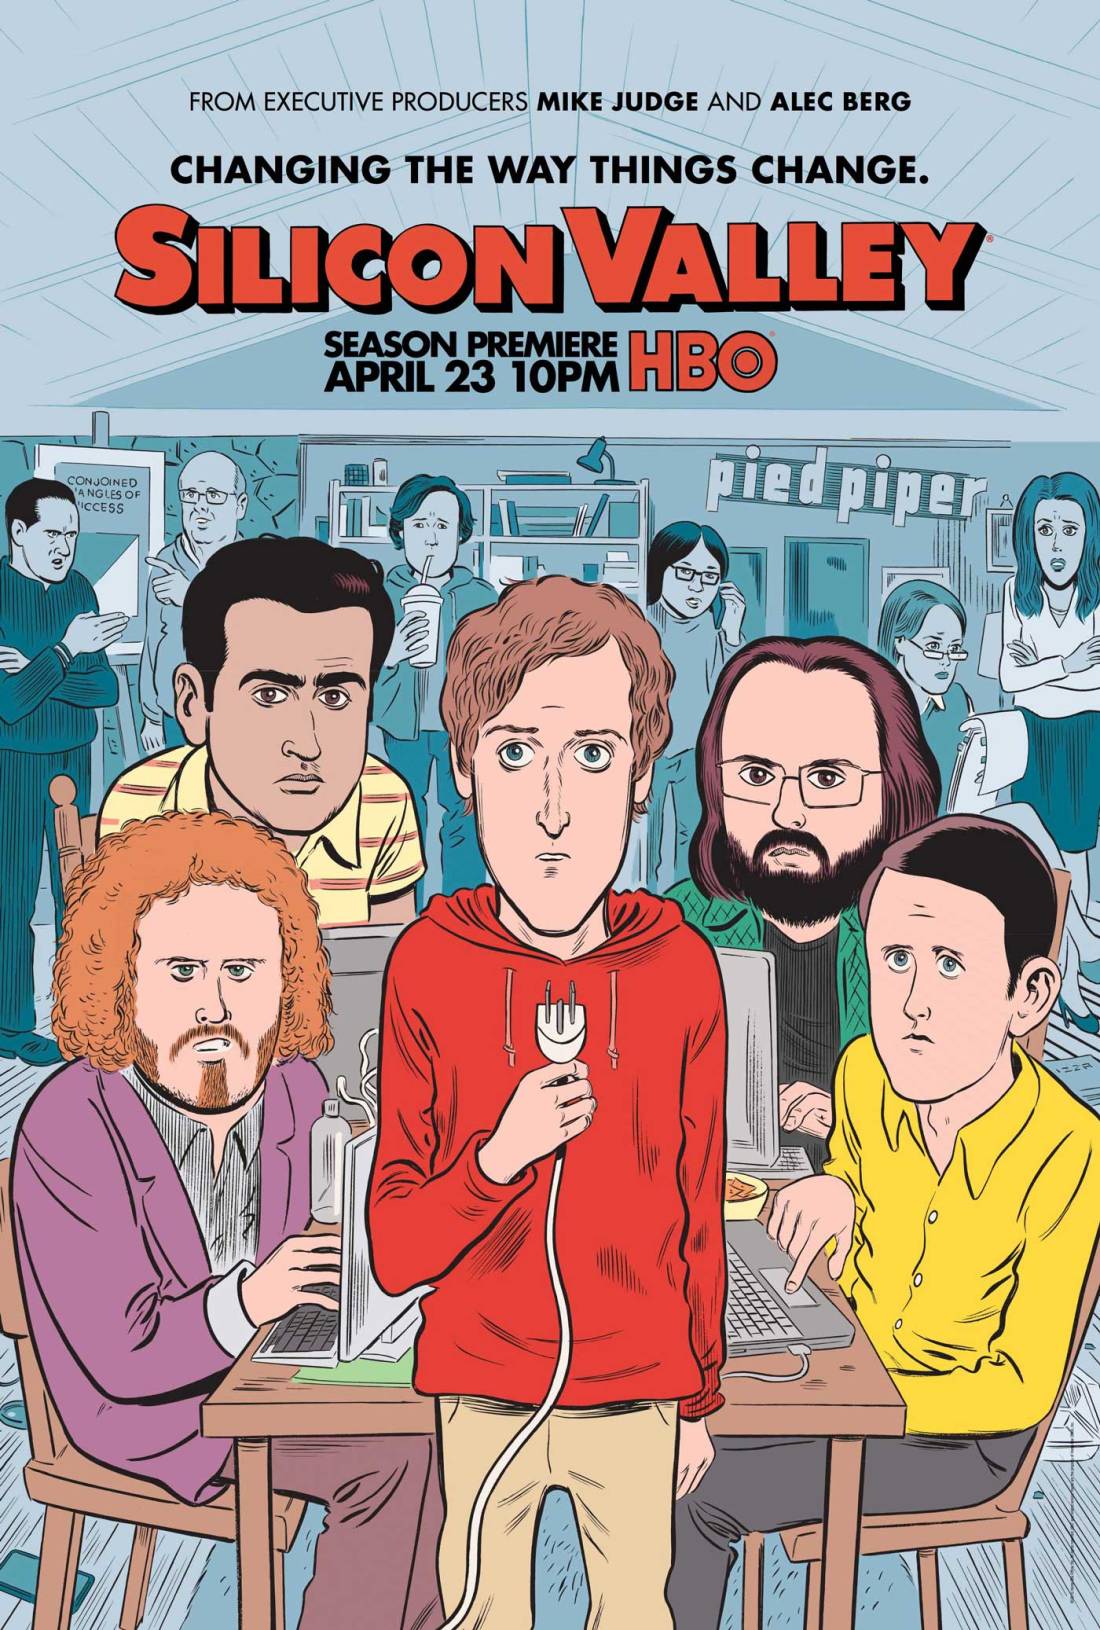 siliconvalley season4 poster Silicon Valley gets a fitting graphic novel treatment in new Season 4 poster